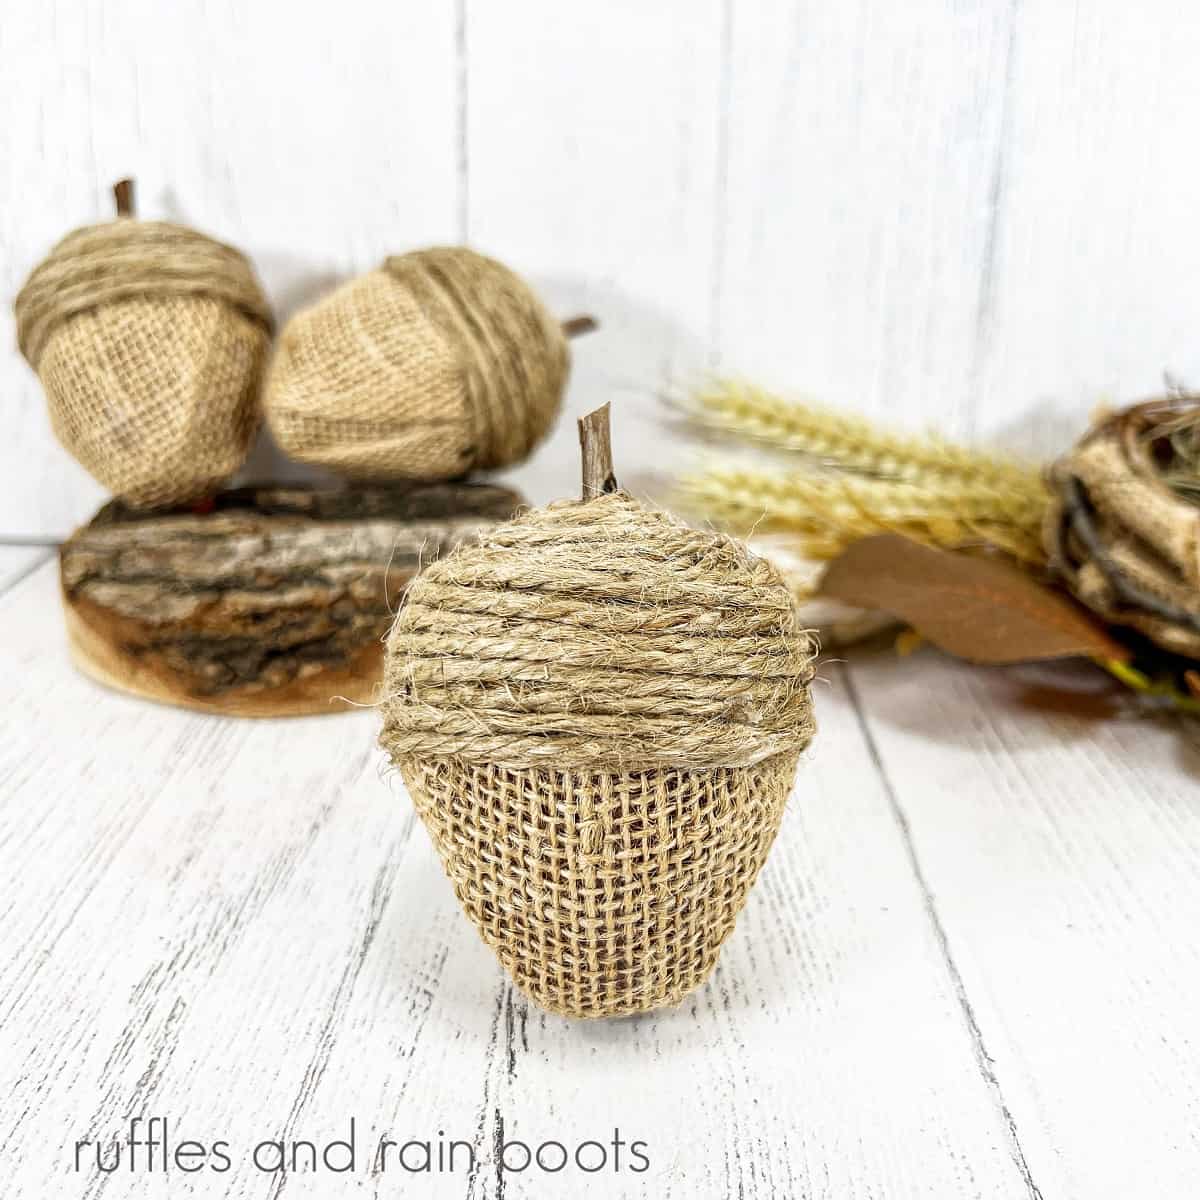 A close up image of a finished Dollar Tree Easter egg acorns next to additional acorns and a fall themed bird's nest against a white weathered wood background.